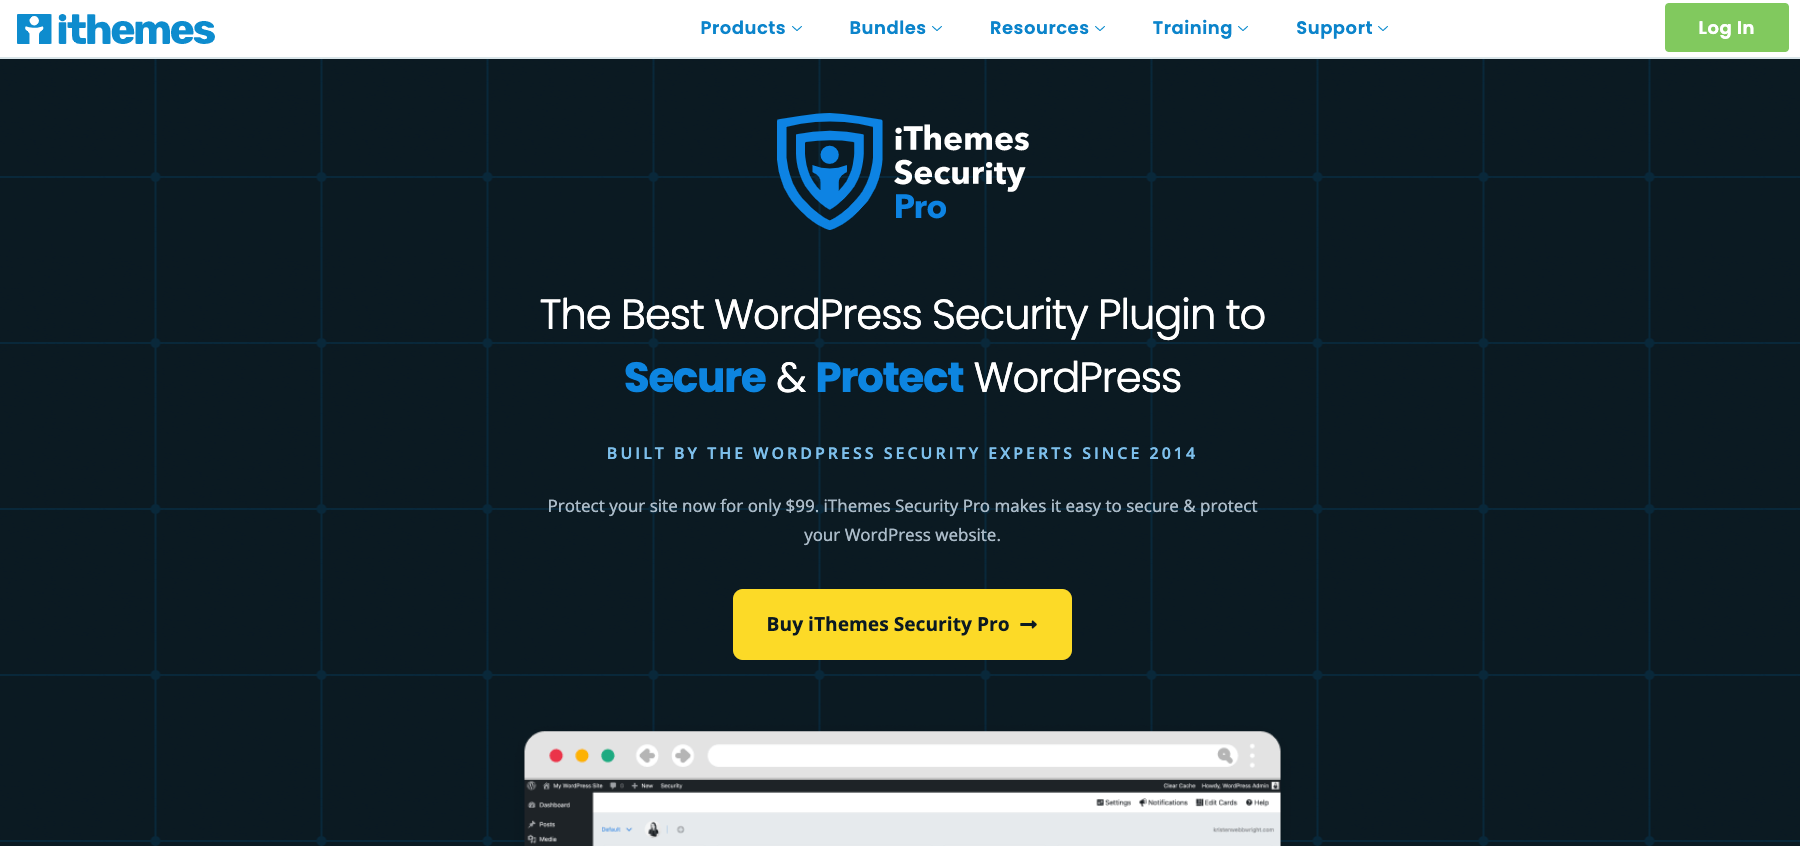 iThemes Security Pro is a good plugin to add to your WordPress security checklist